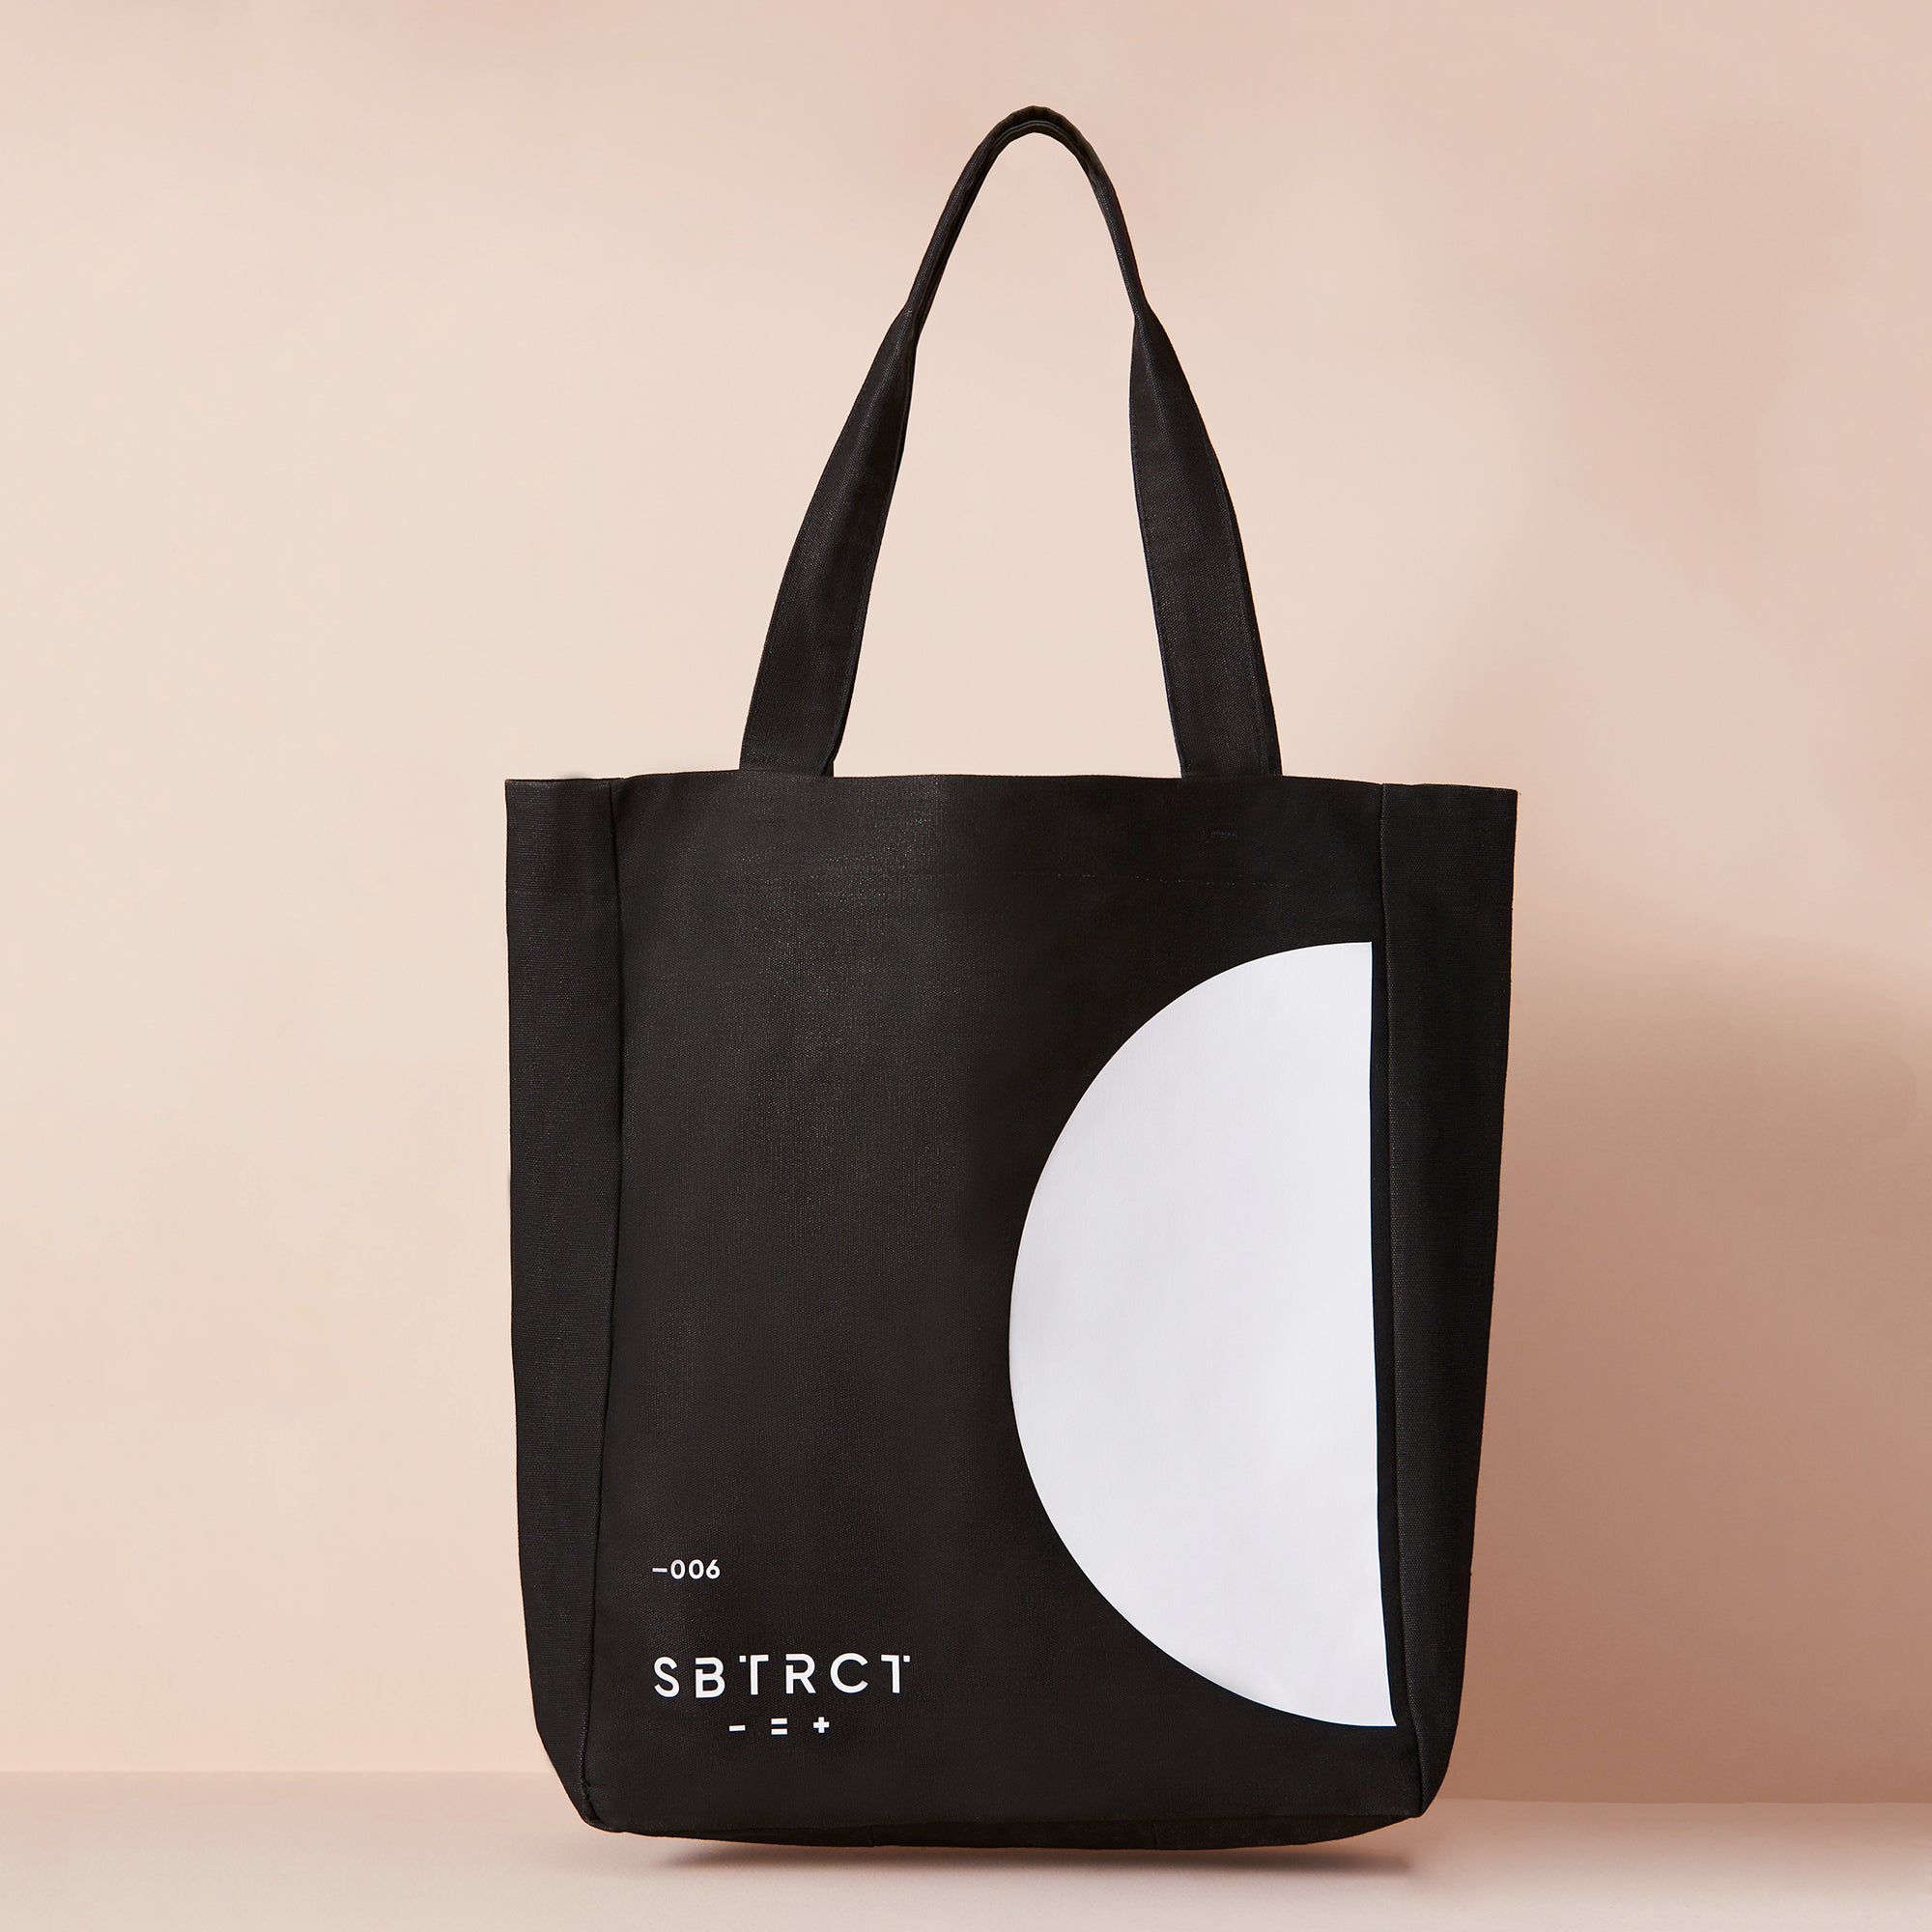 Limited Edition Tote